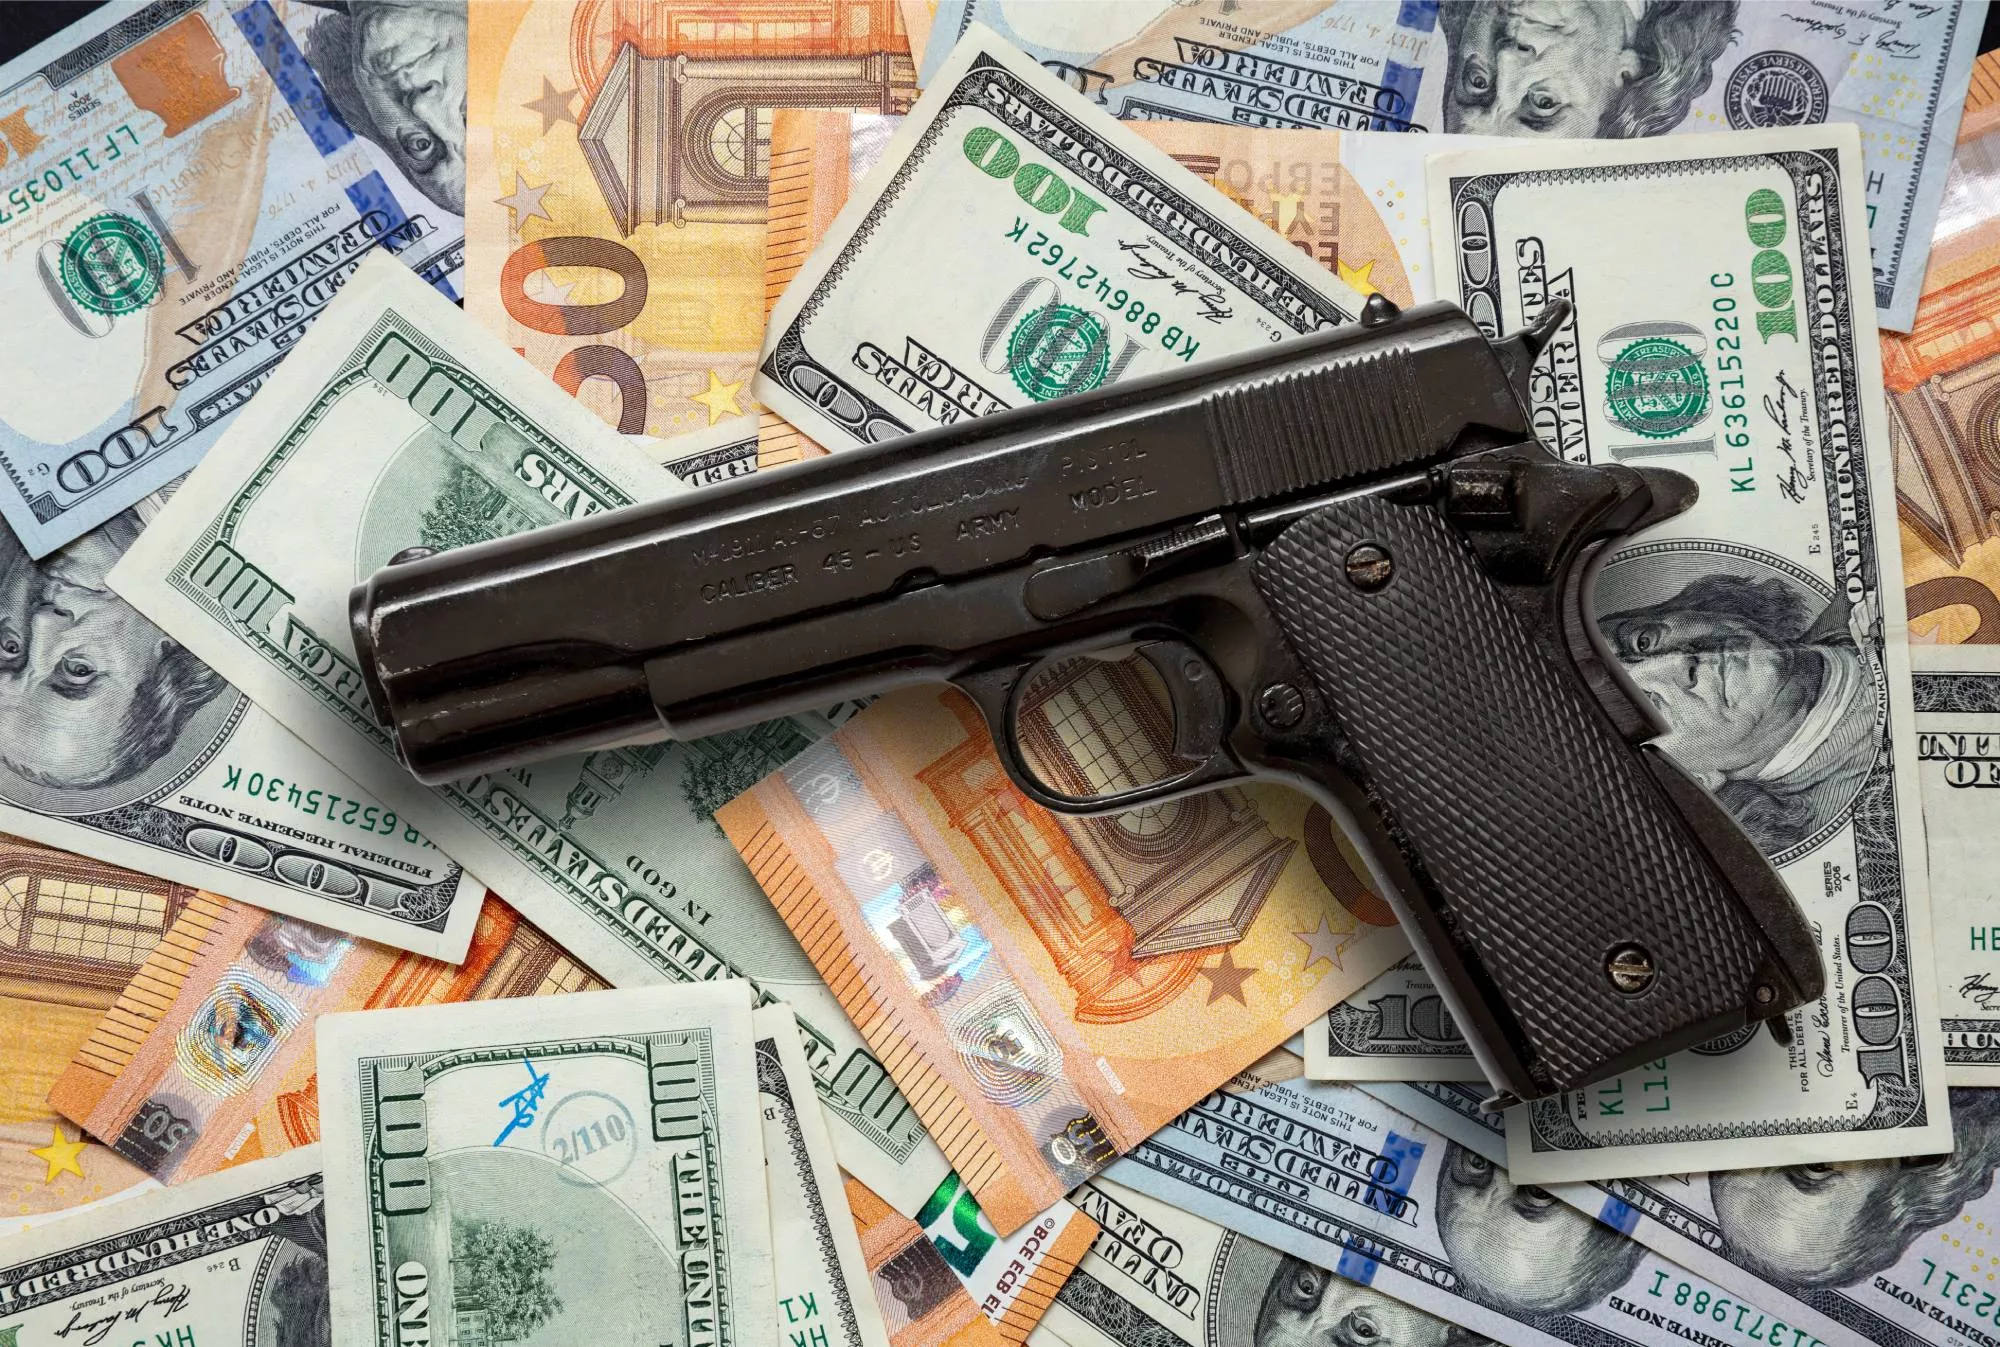 a hand gun resting on a pile of money that you could make if you sell guns